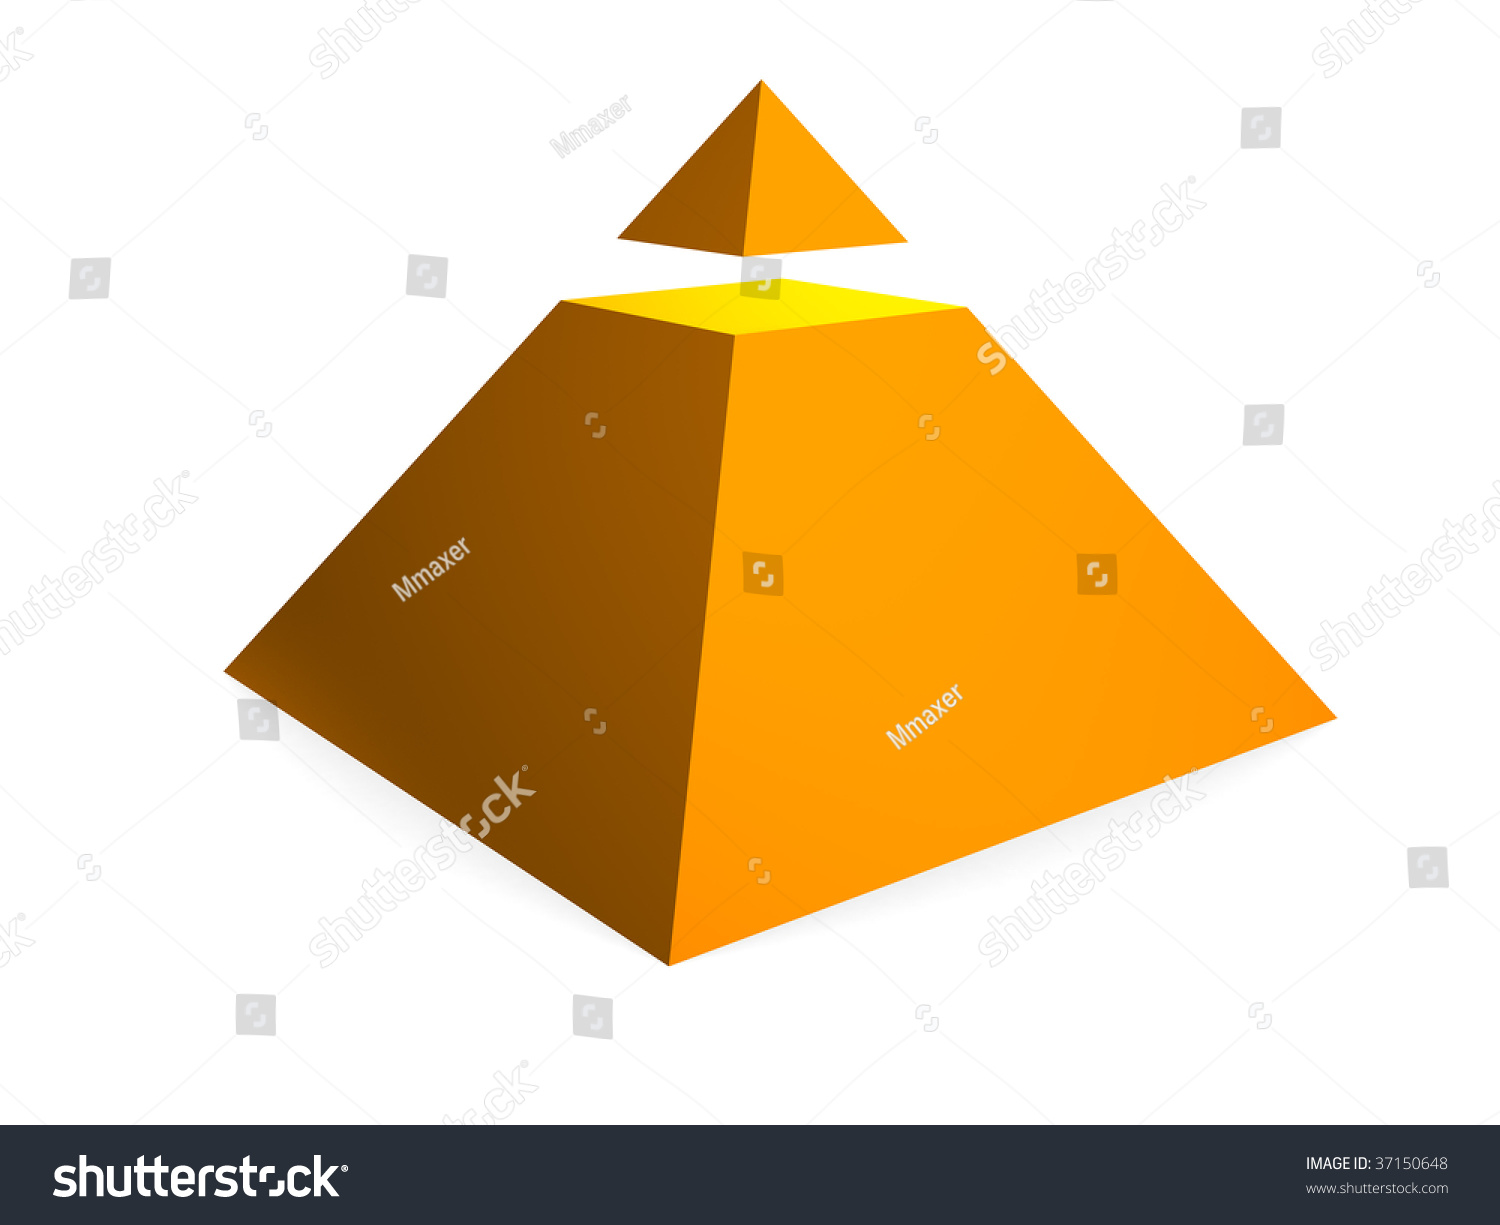 Abstract 3d Illustration Of Pyramid Symbol Over White Background ...